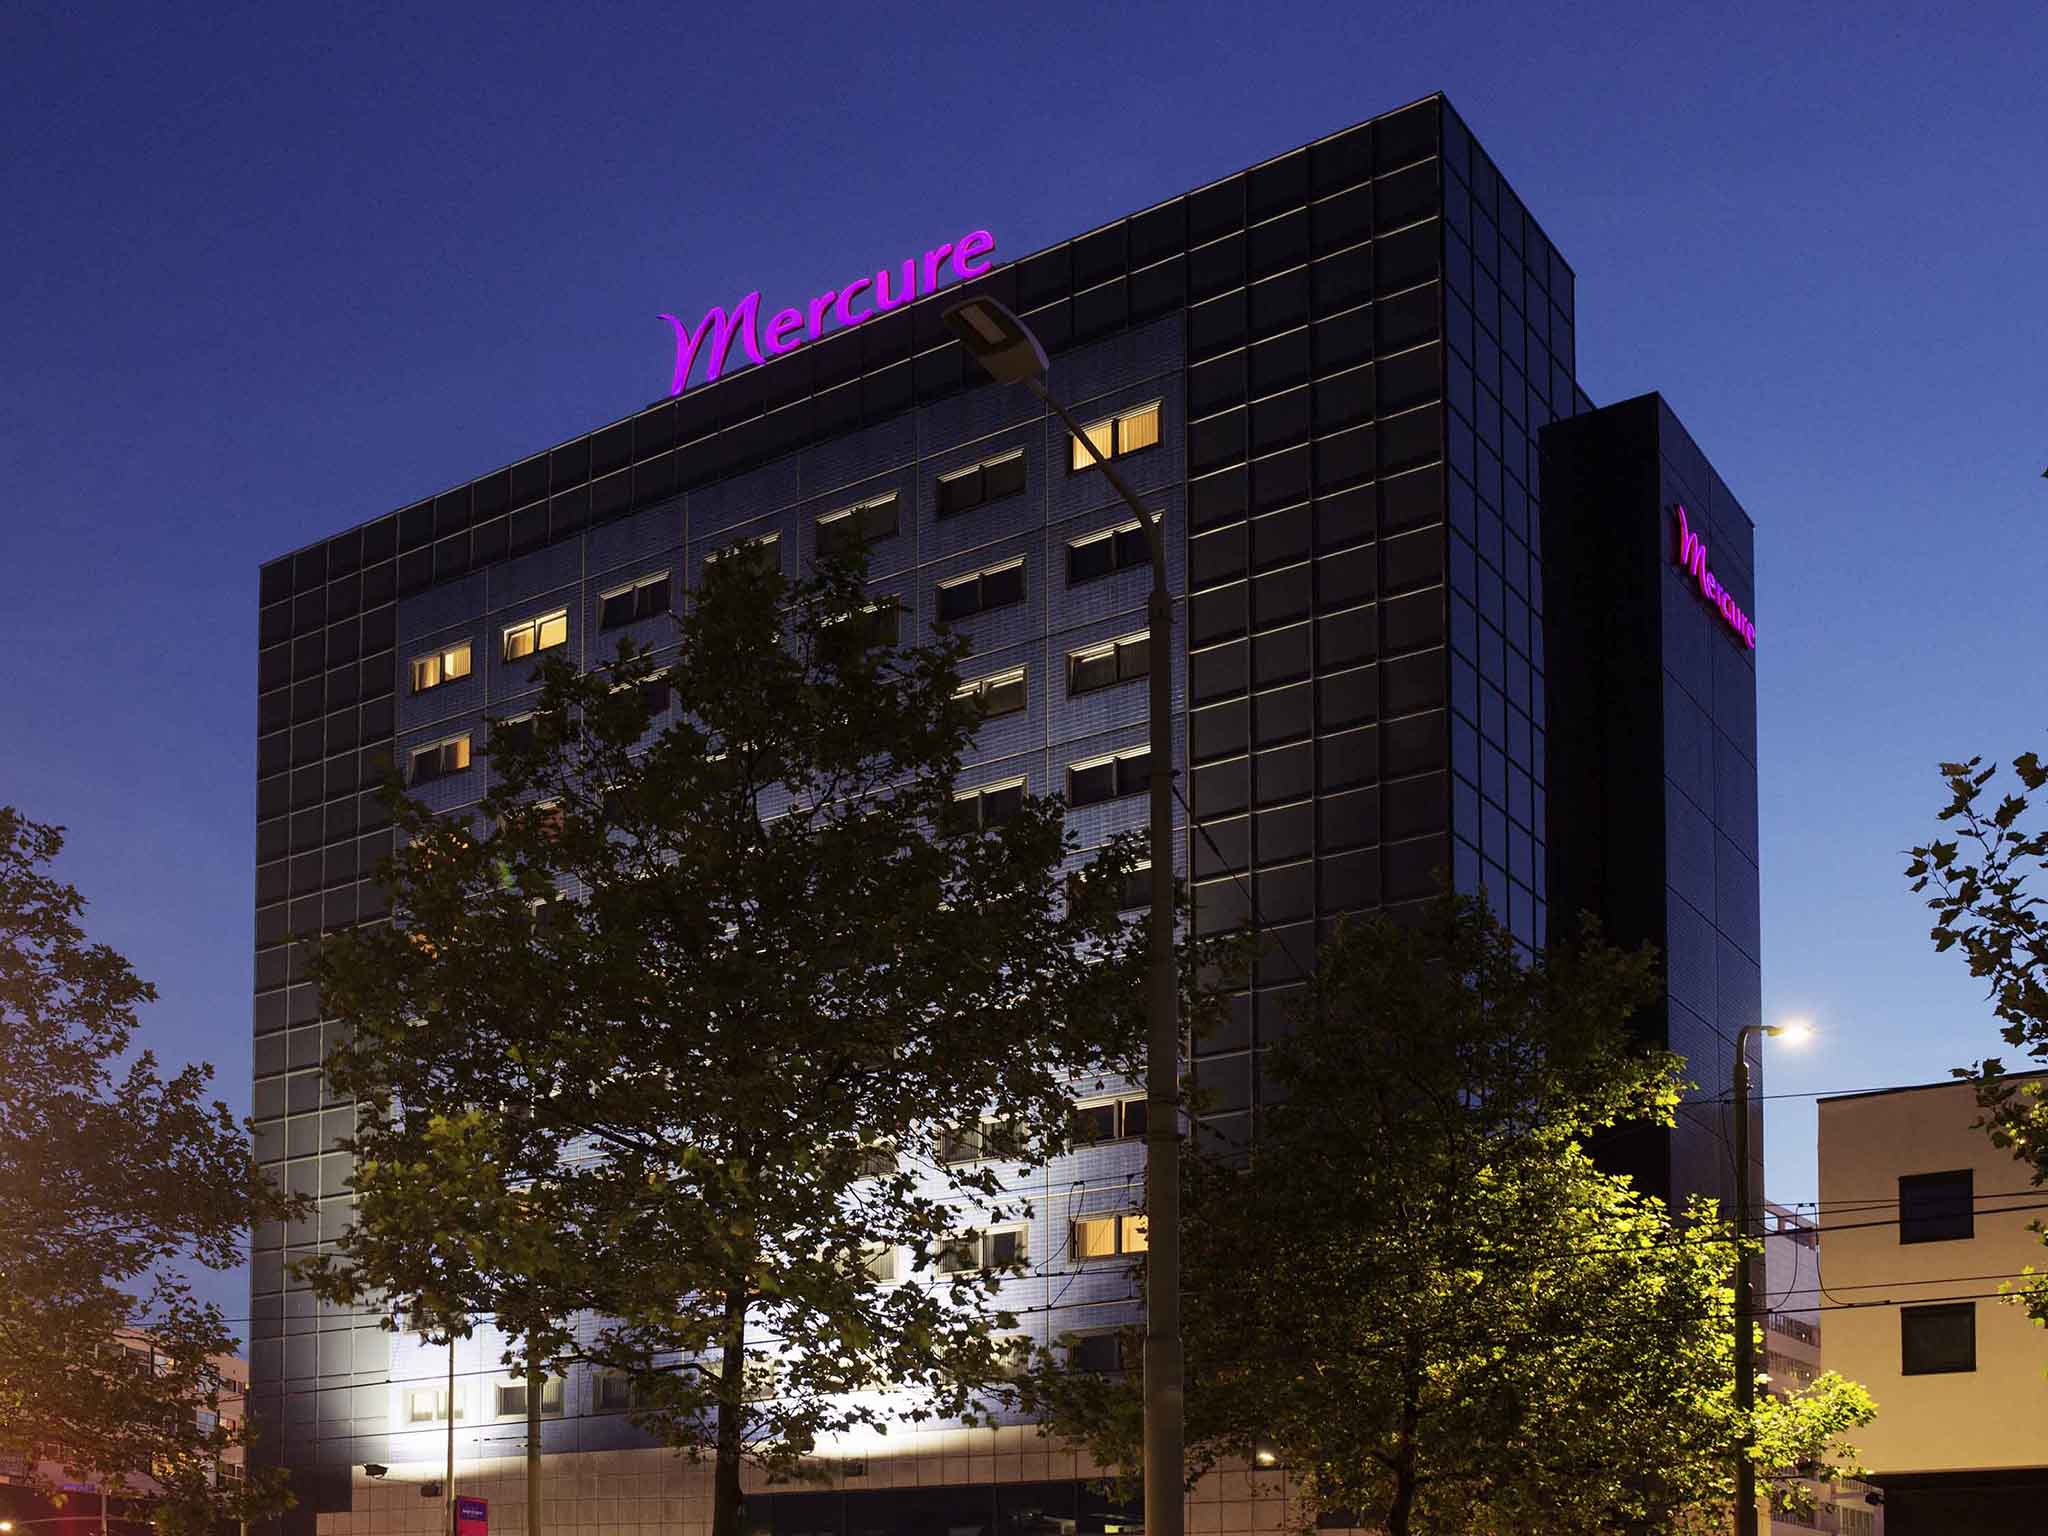 Mercure Hotel Den Haag Central <br/>83.33 ew <br/> <a href='http://vakantieoplossing.nl/outpage/?id=7ad3d8ce982f5b3823a2c6fa7521c814' target='_blank'>View Details</a>